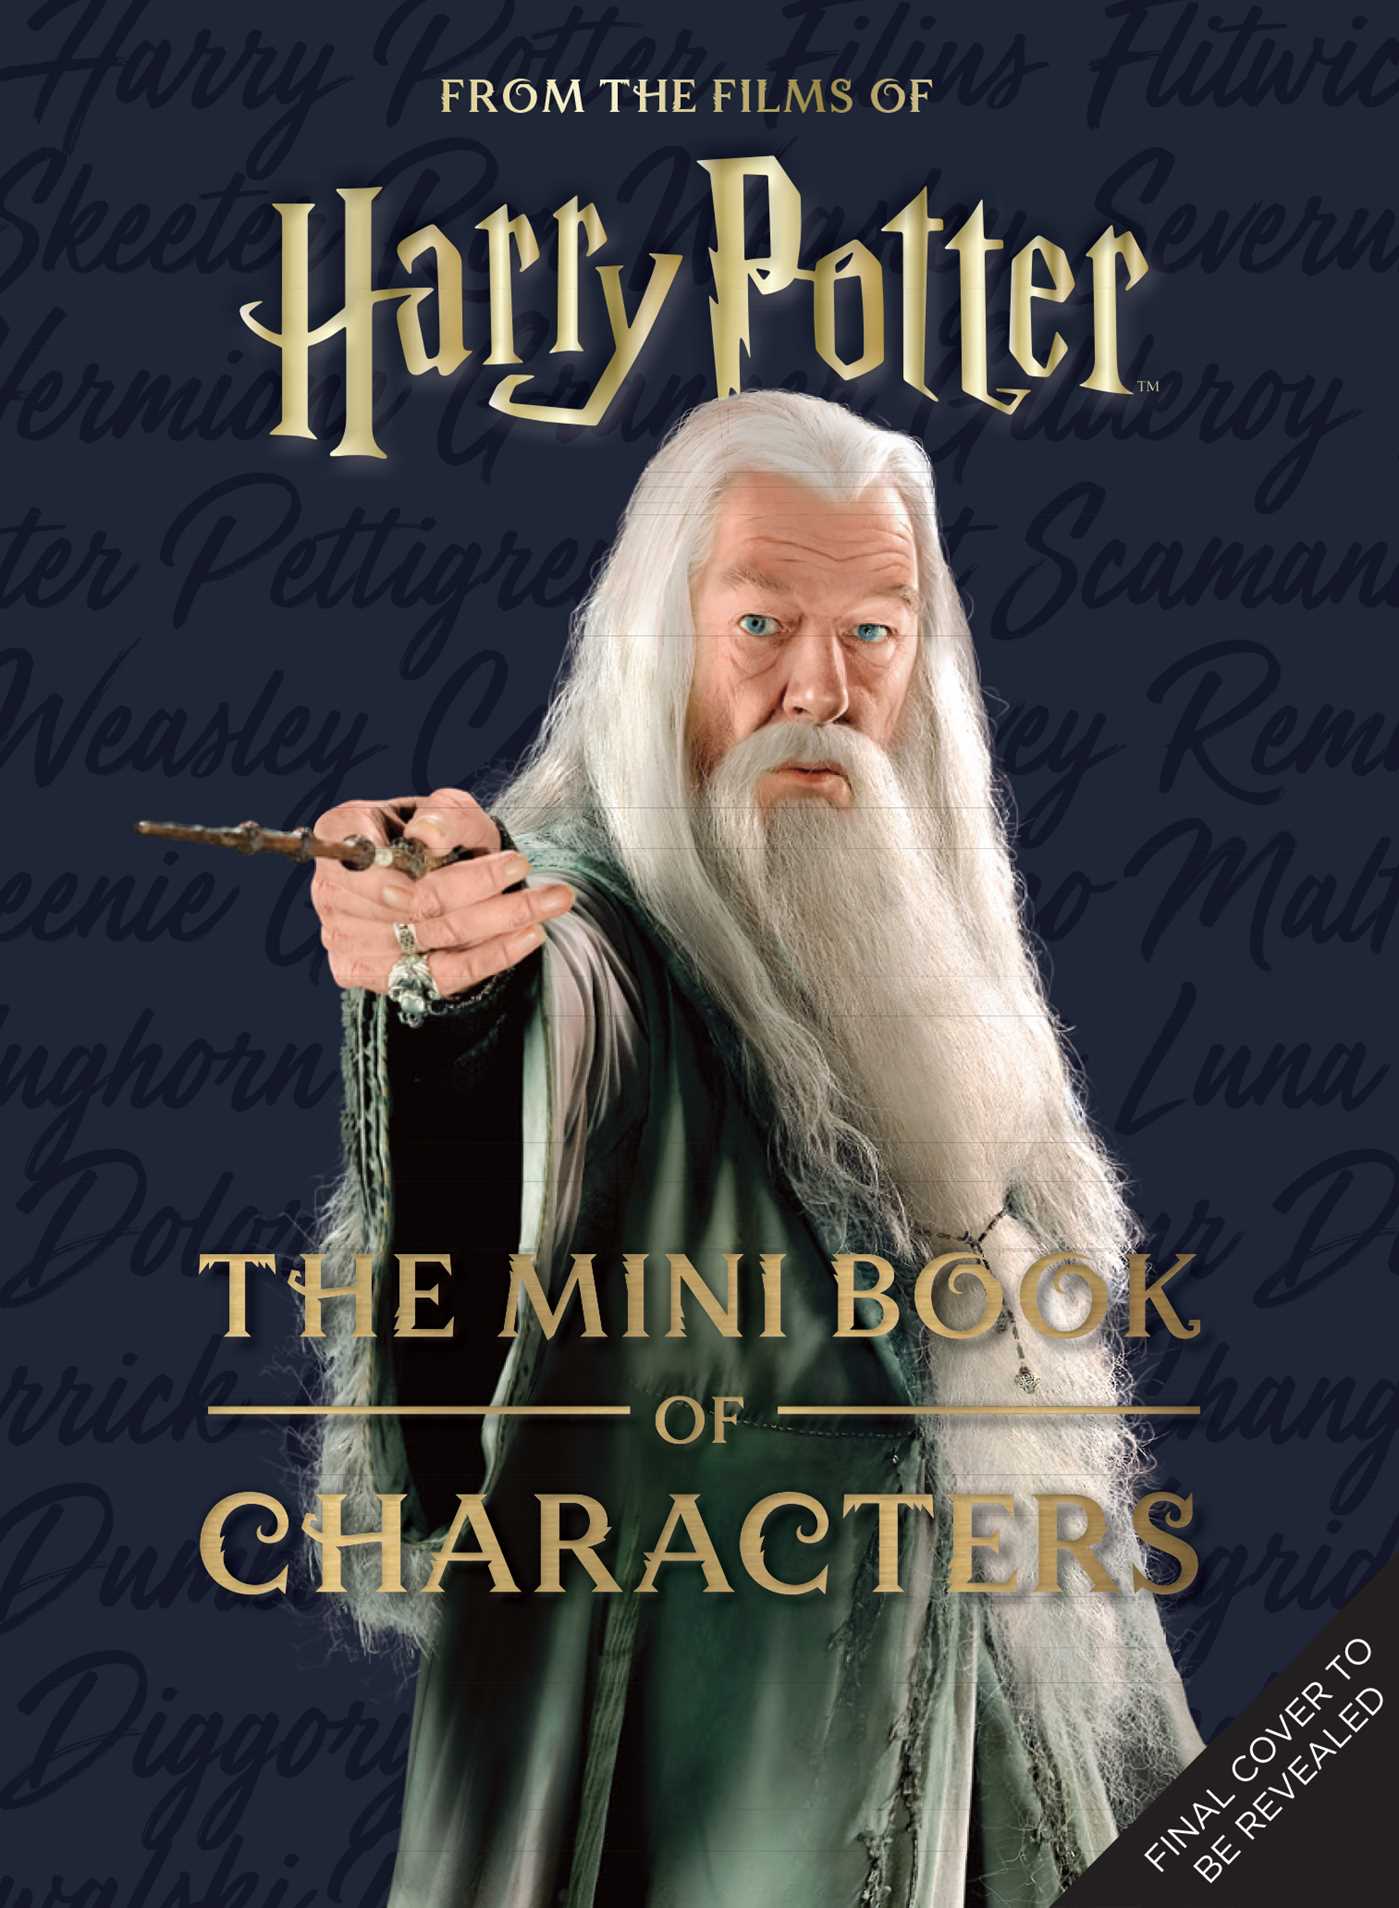 HARRY POTTER : THE MINI BOOK OF CHARACTERS